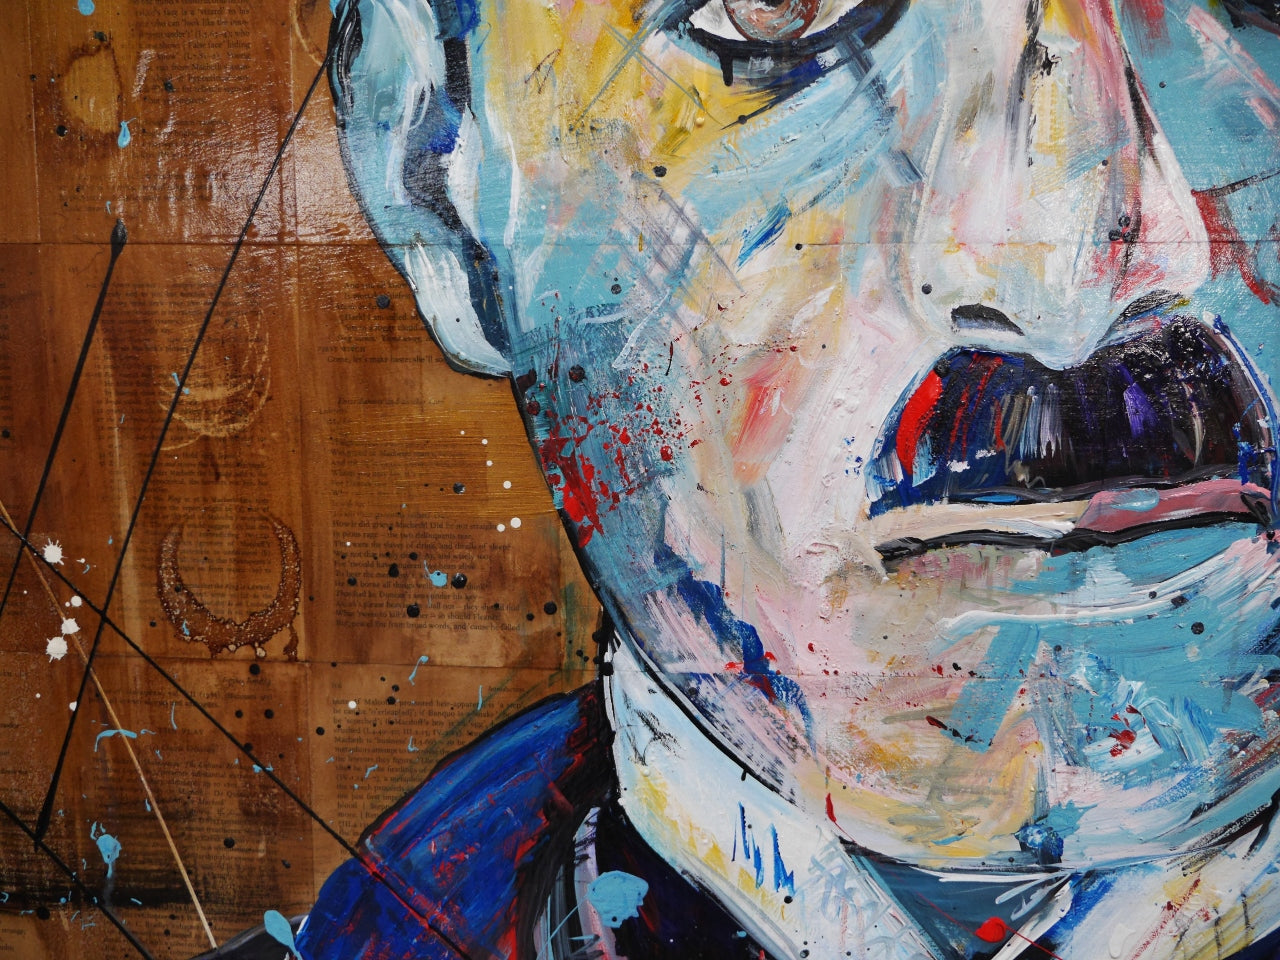 Blue Charlie 140cm x 100cm Charlie Chaplin Abstract Realism Book Club Painting (SOLD)